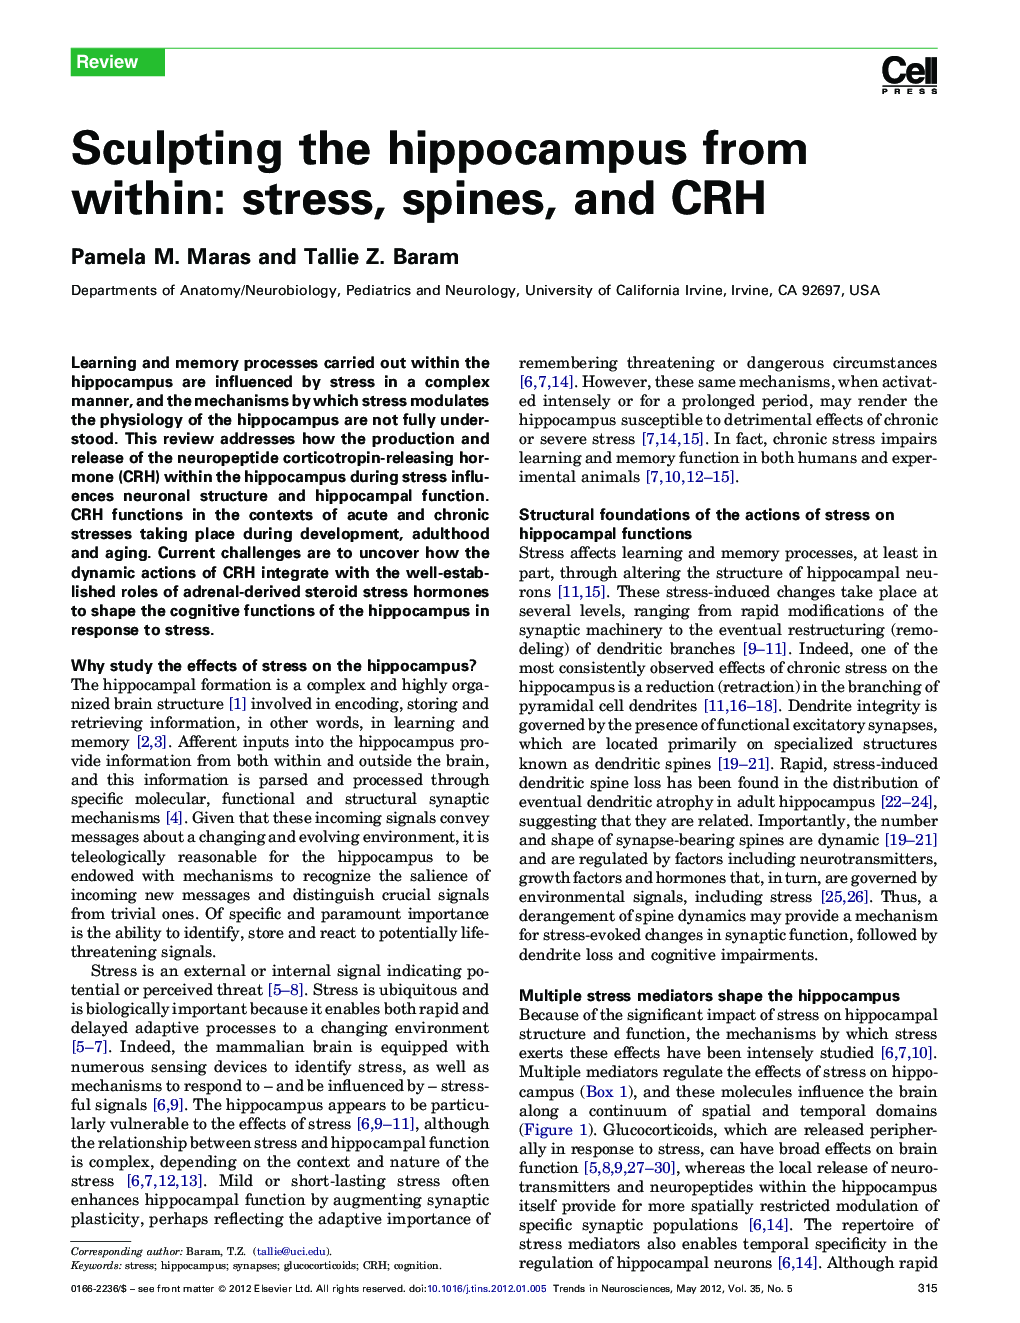 Sculpting the hippocampus from within: stress, spines, and CRH